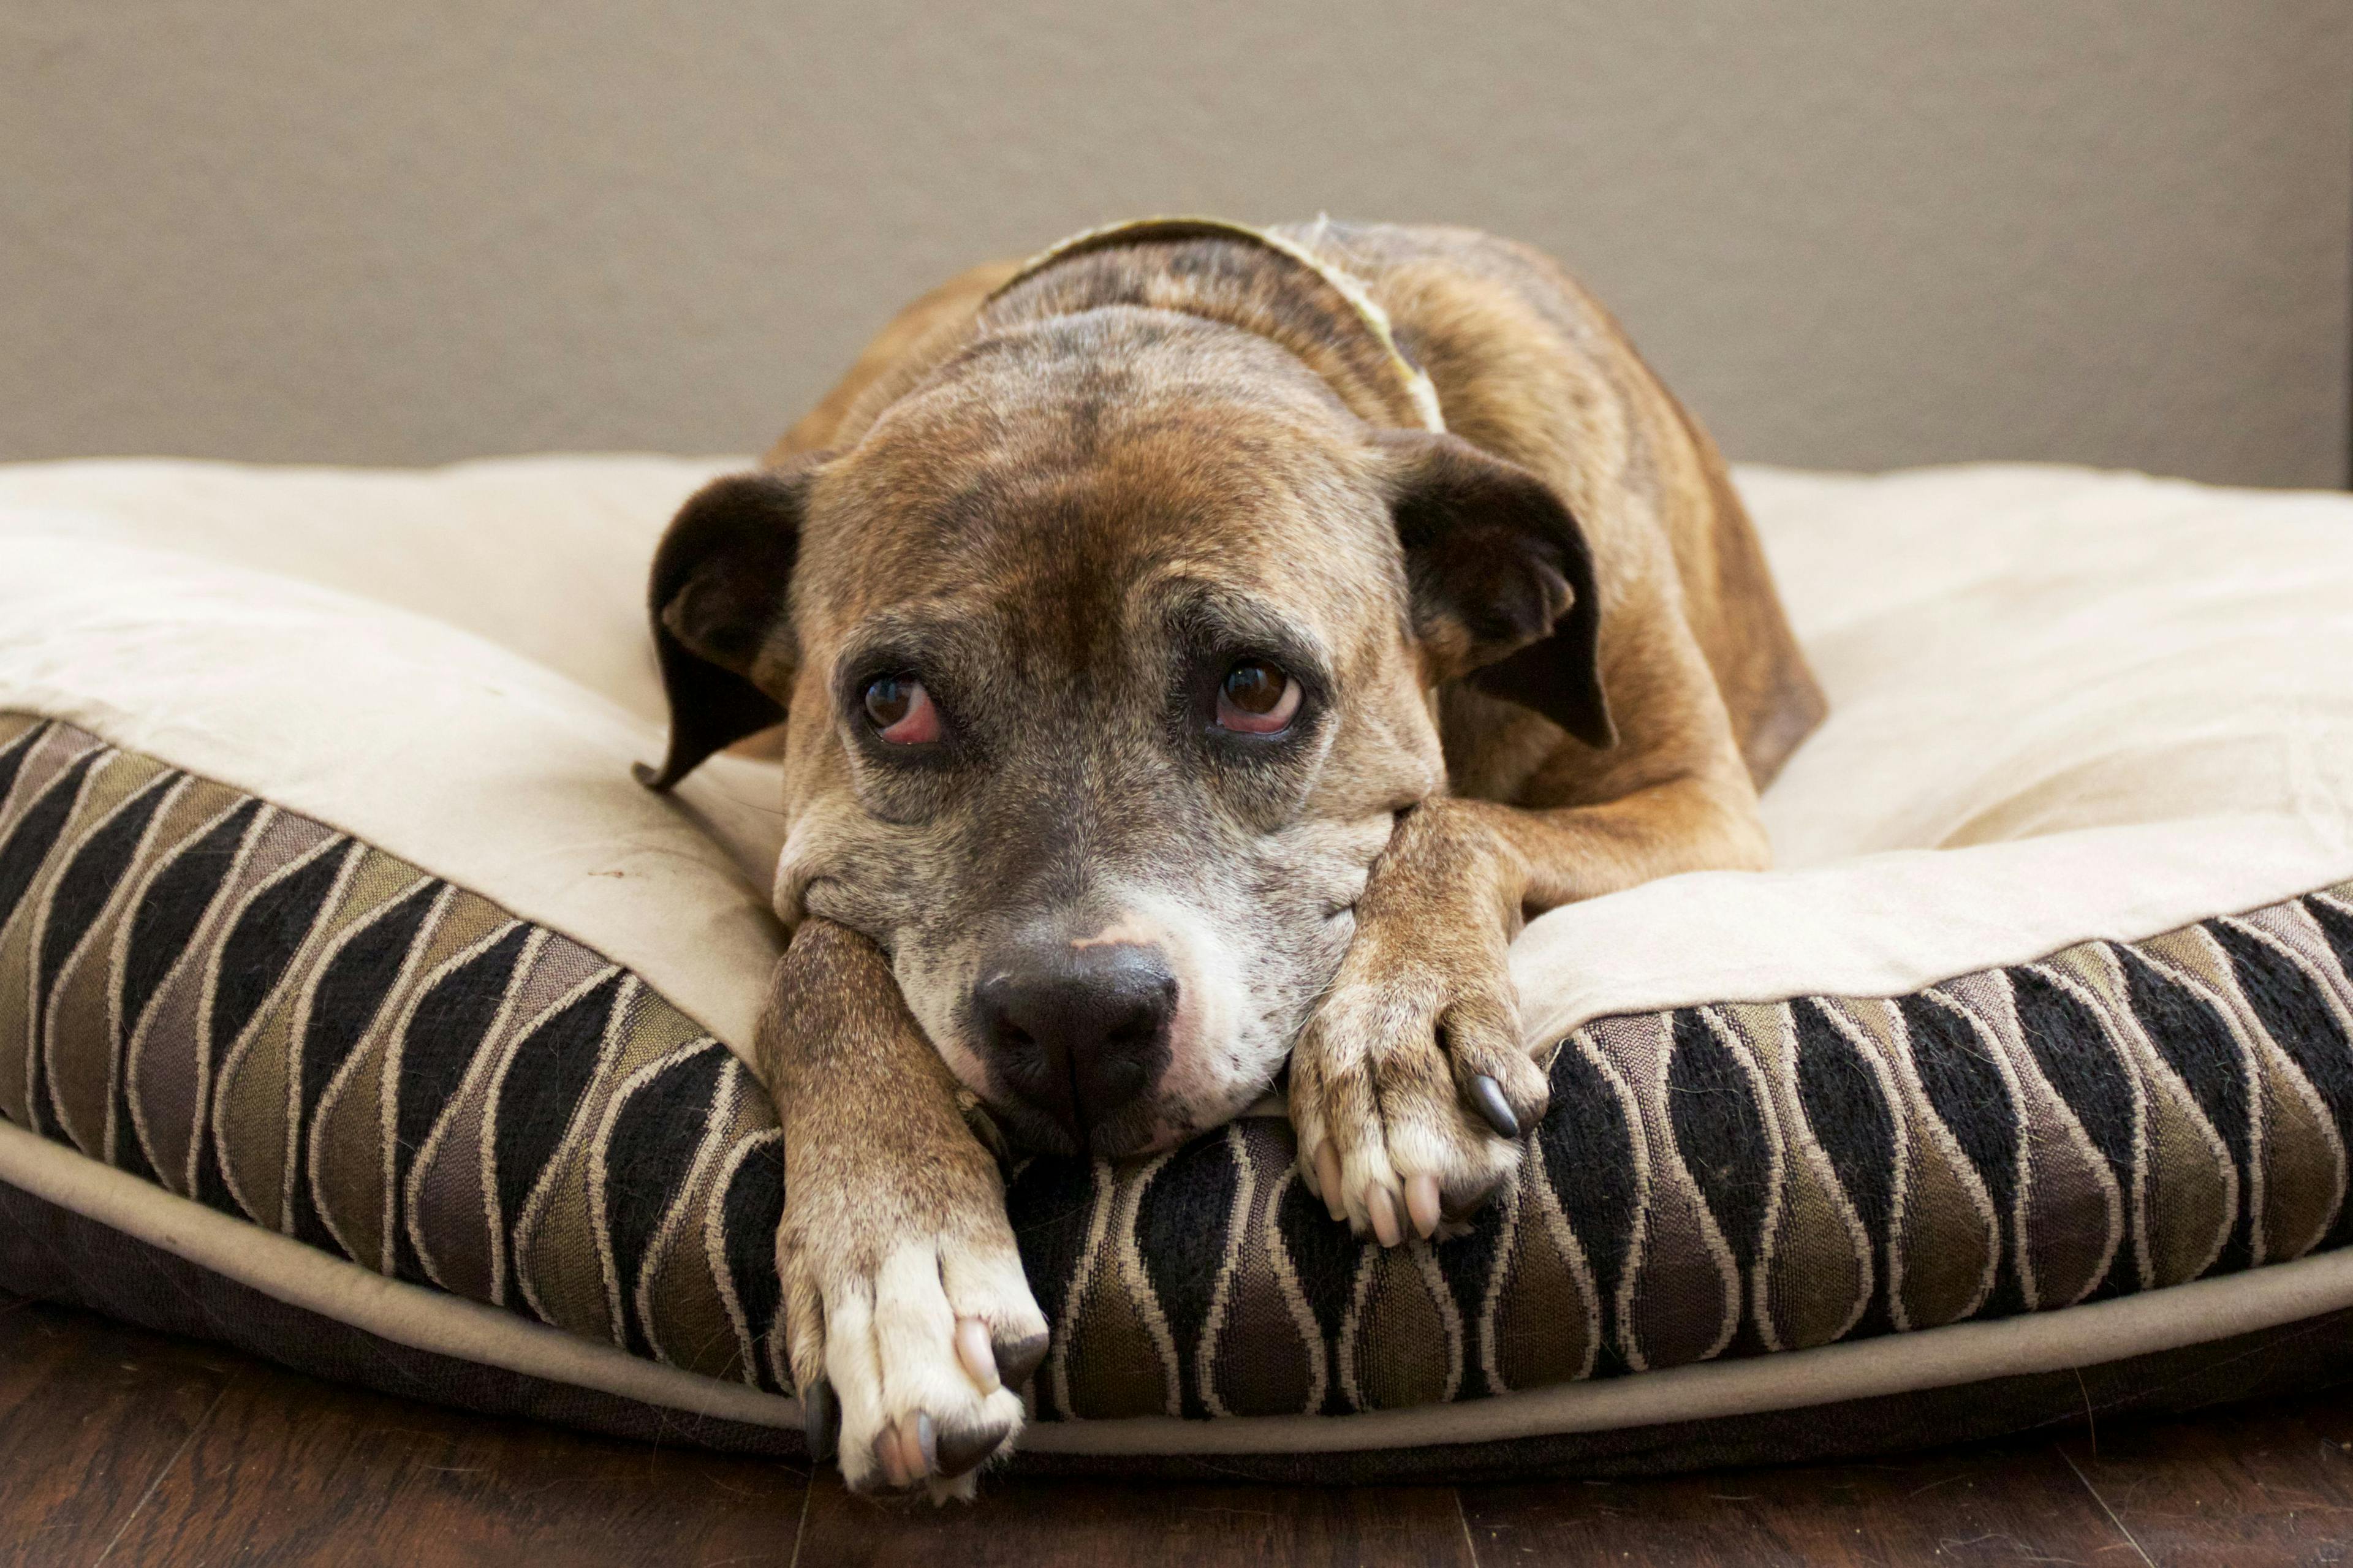 Too often, lameness in dogs is misdiagnosed as arthritis